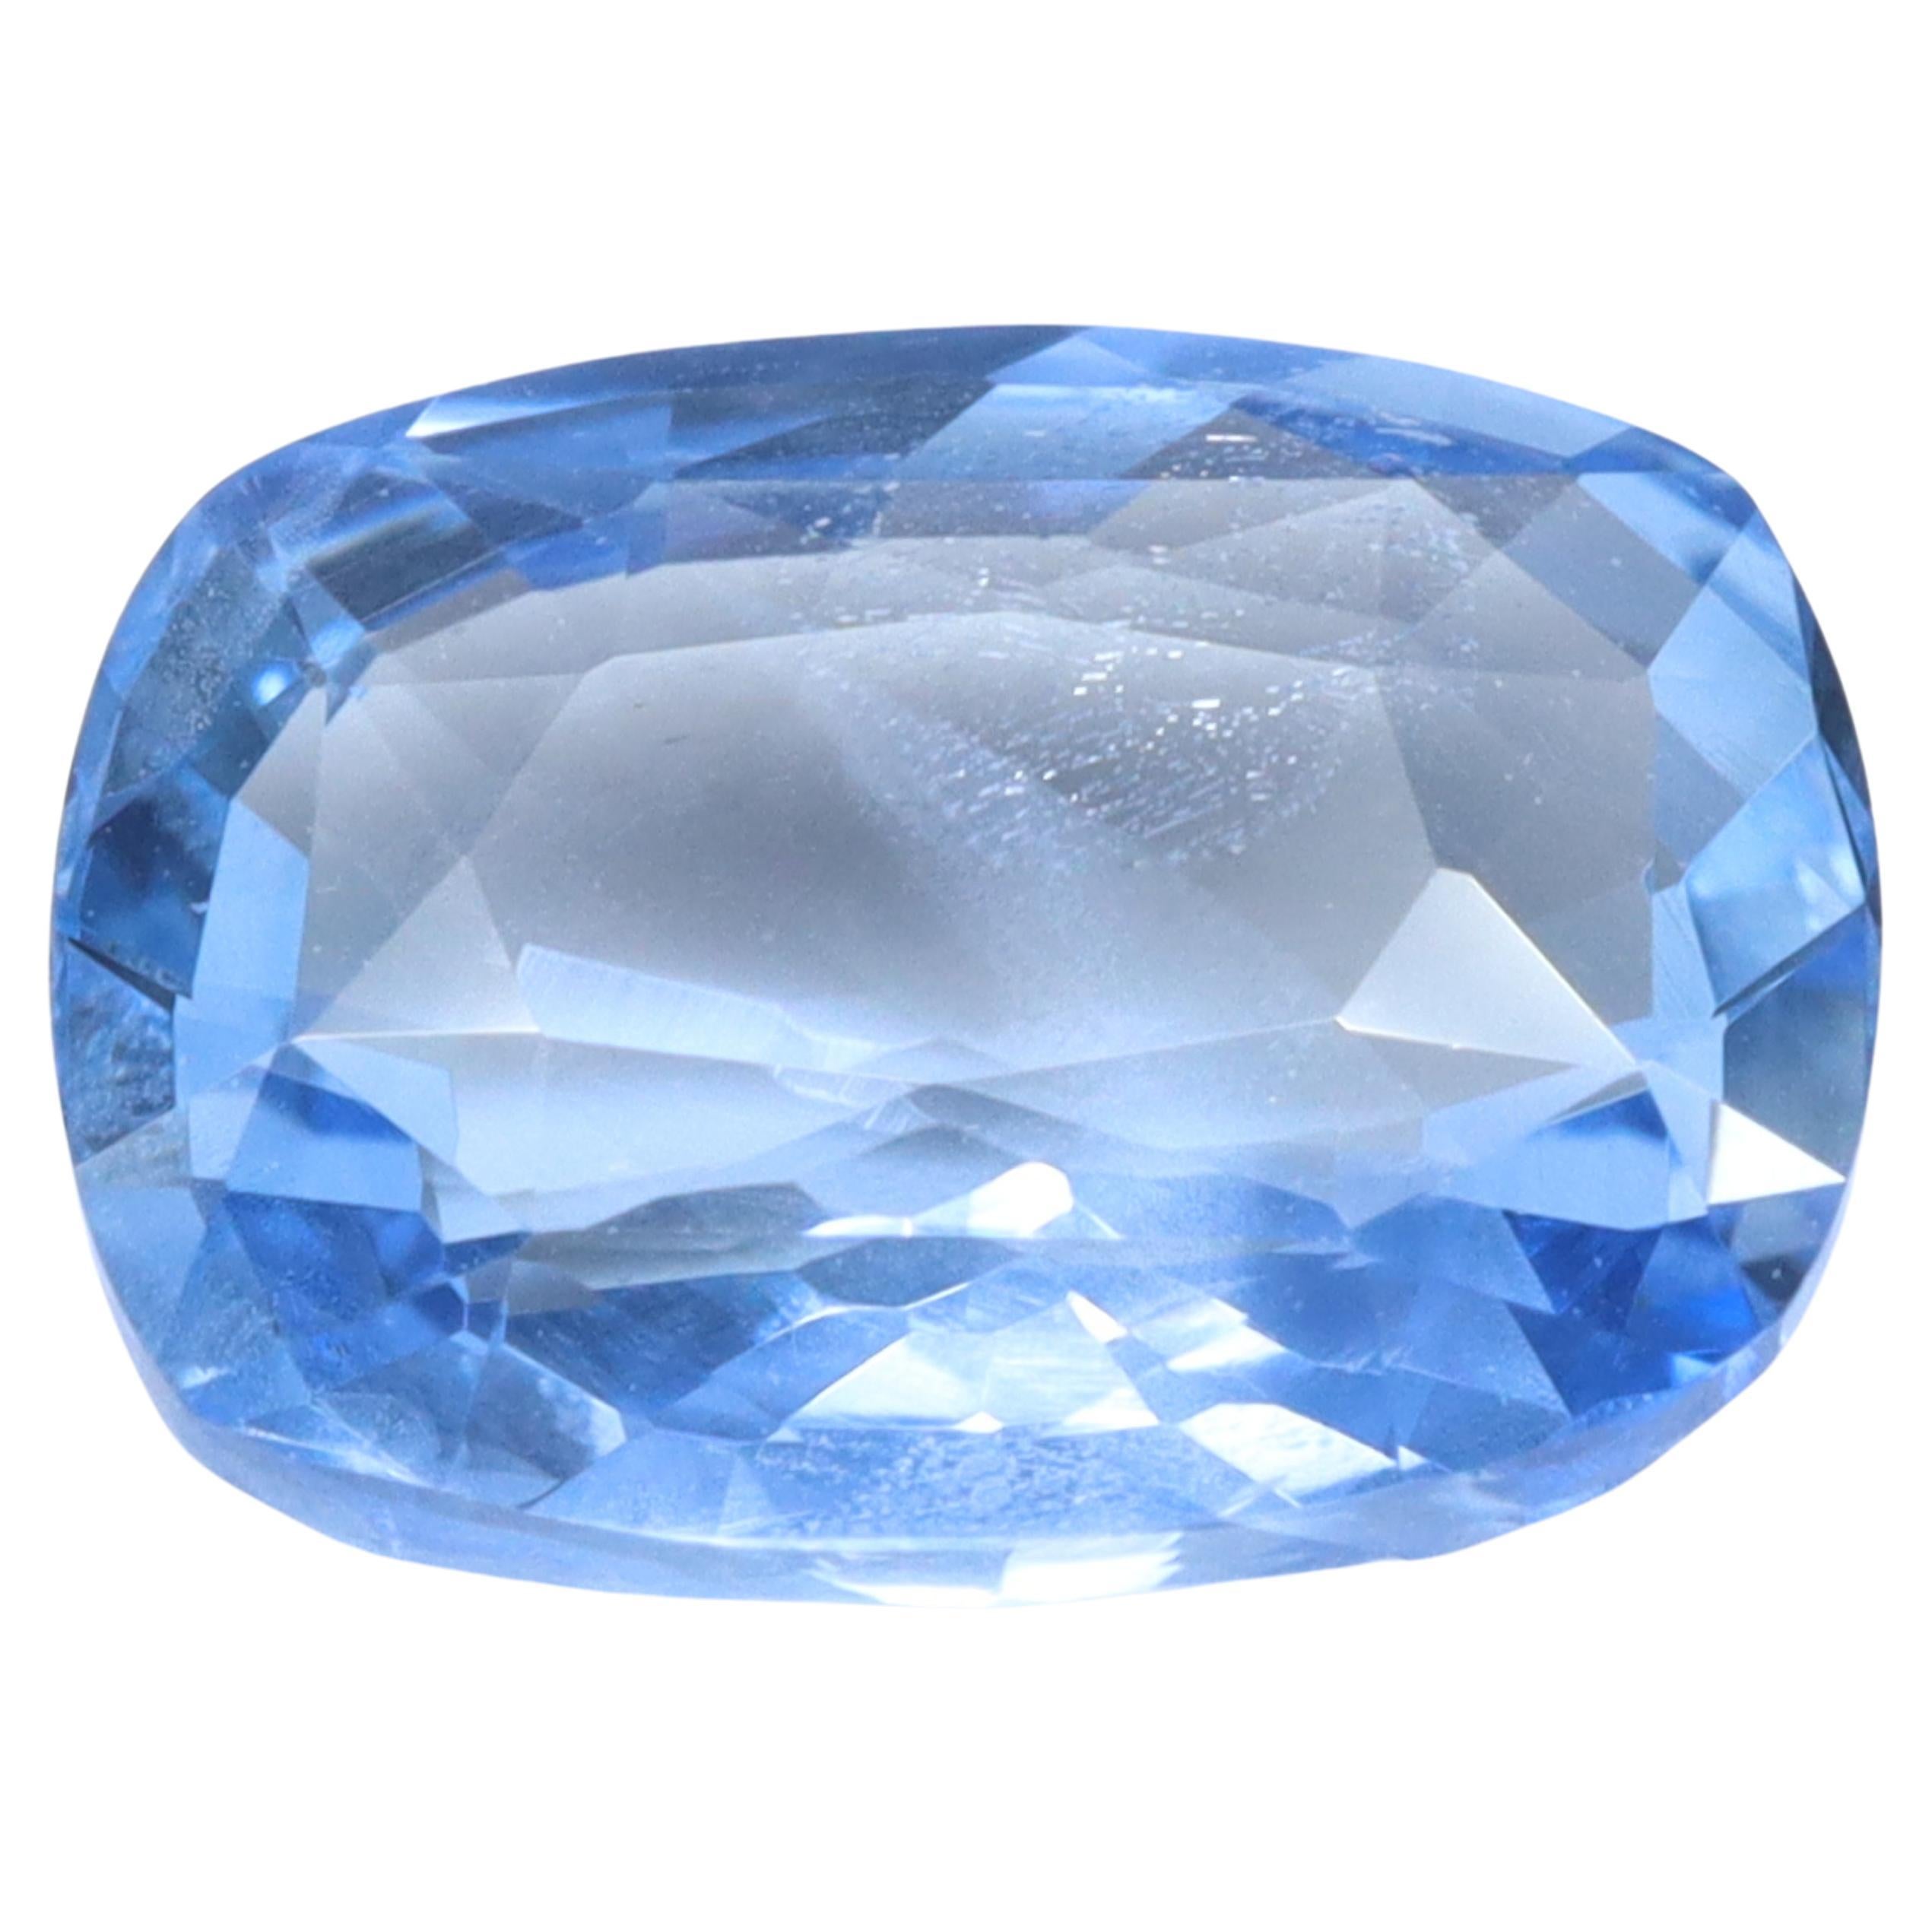 Certified Cushion Cut Unheated Blue Sapphire - 1.69ct For Sale